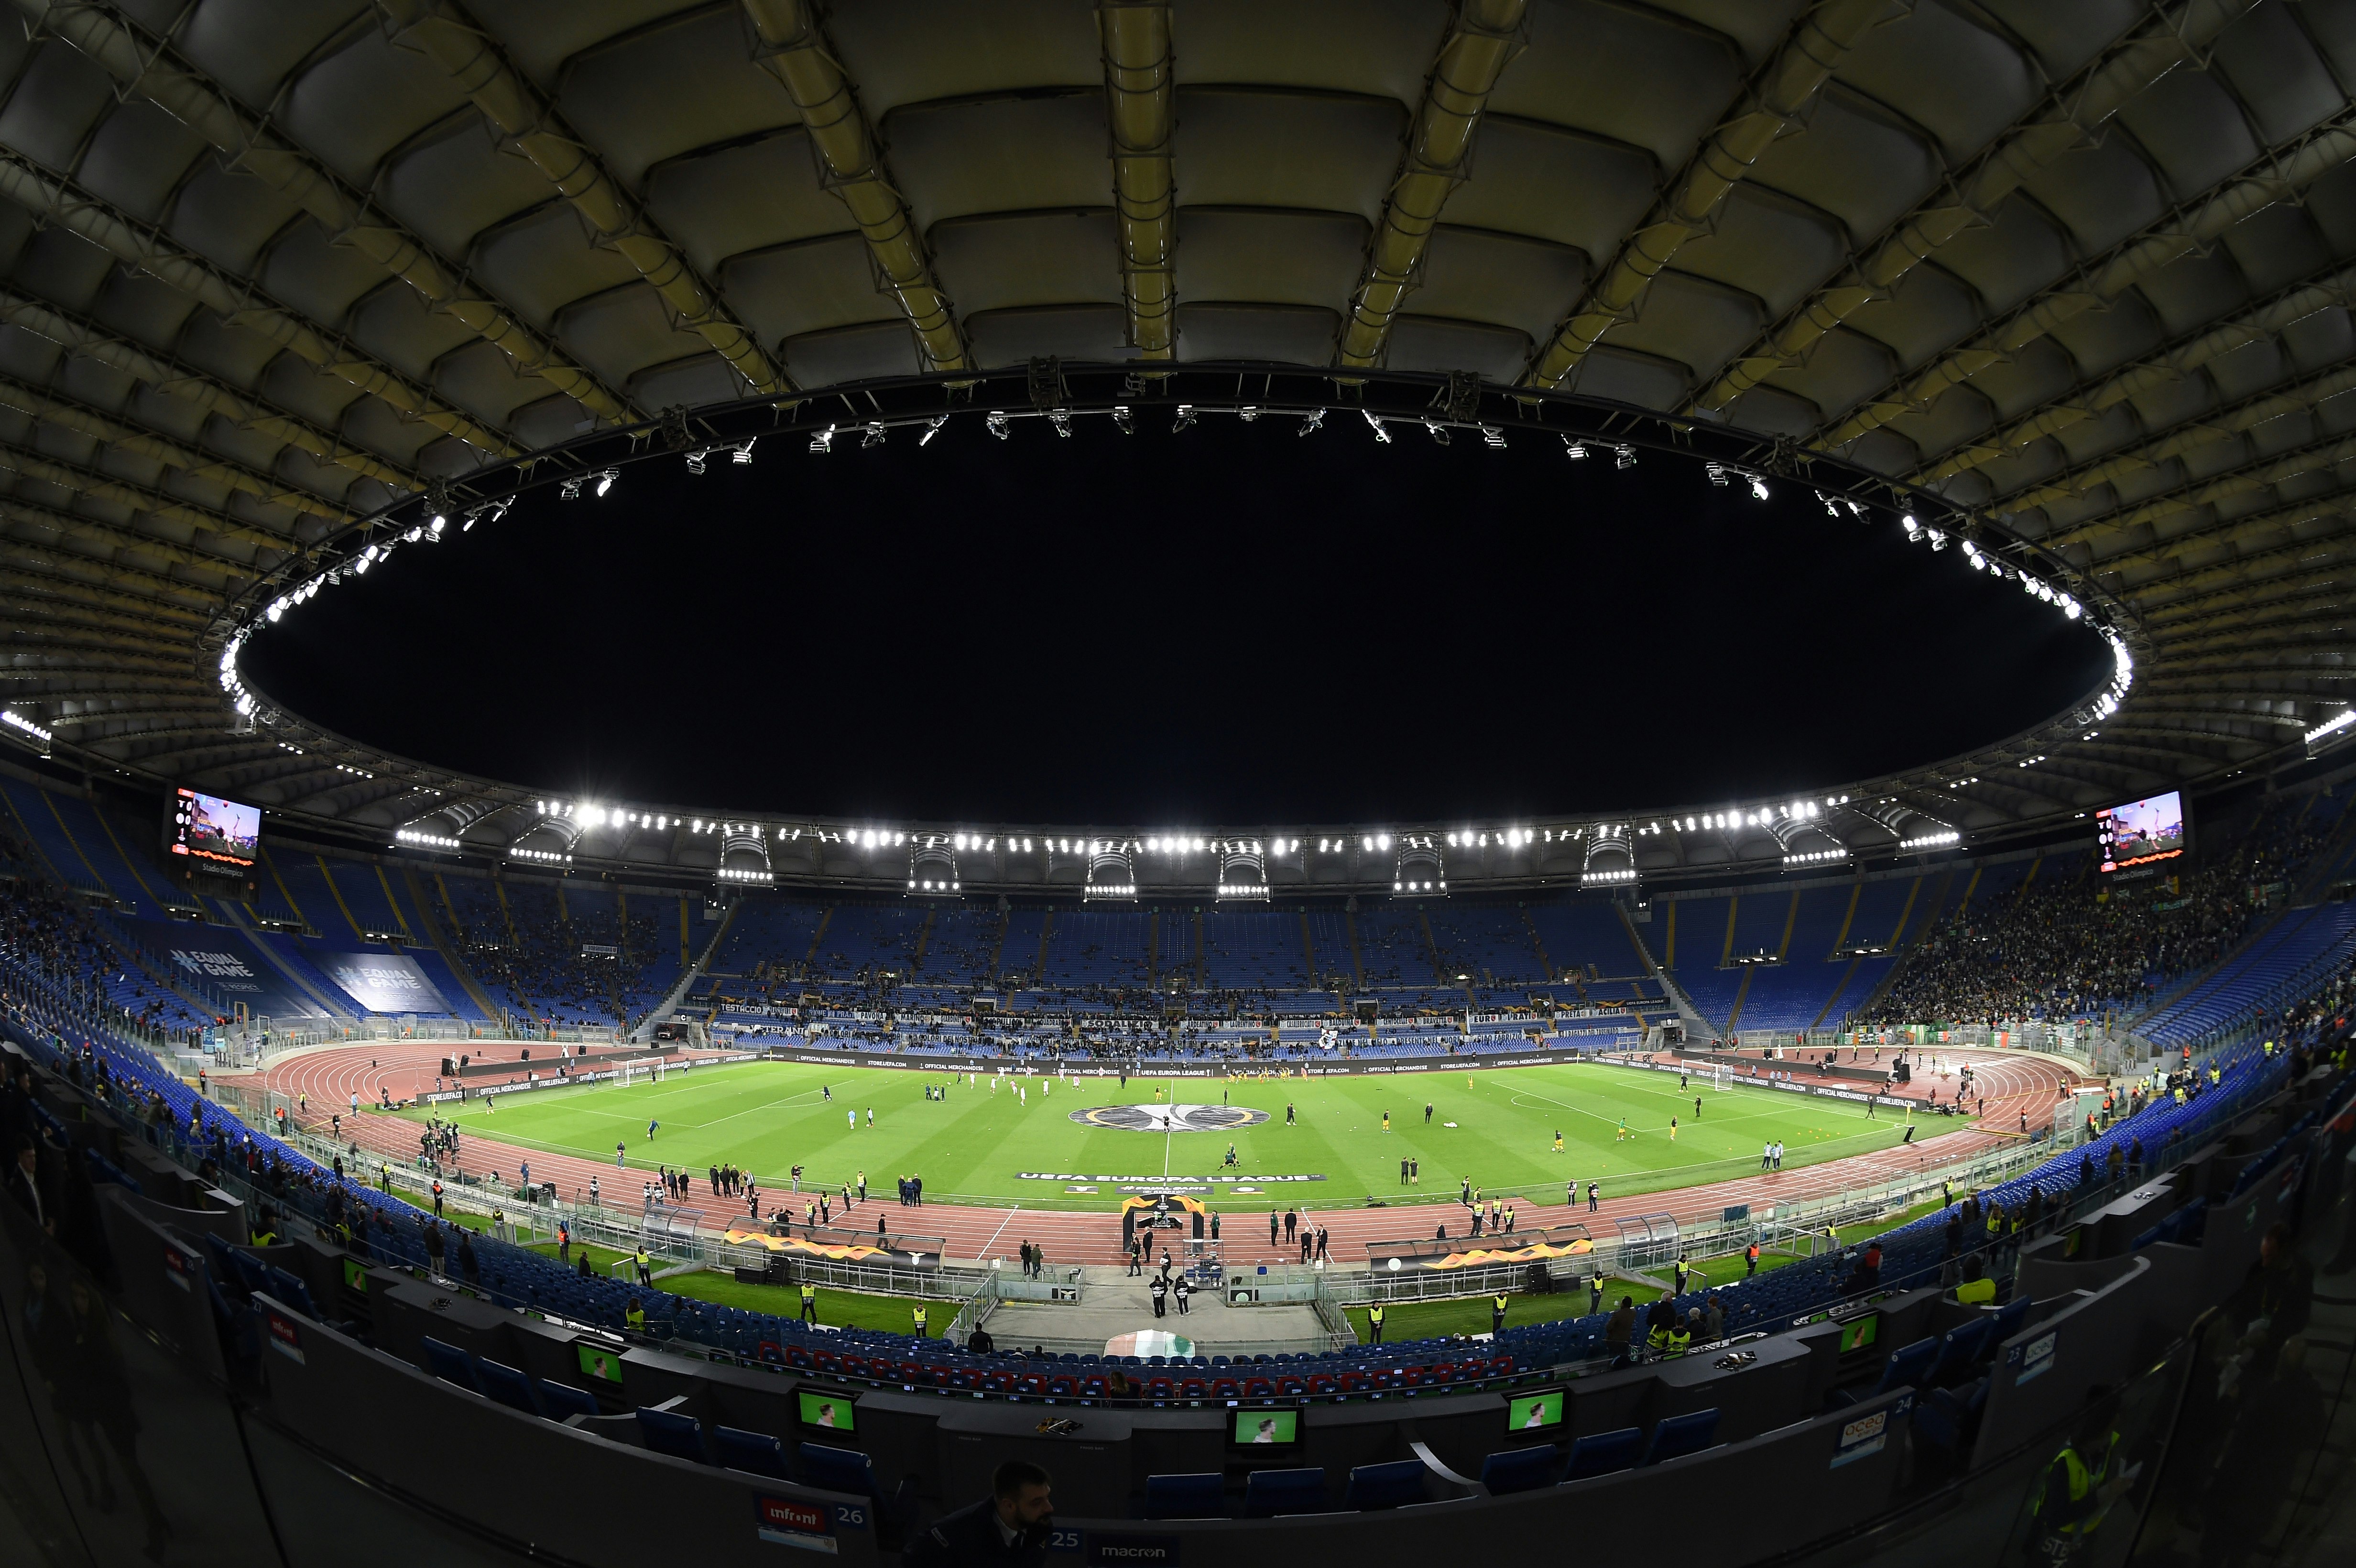 A fish-eye view of the inside of Rome's Stadio Olympico; the football pitch is floodlit and there is a game underway 